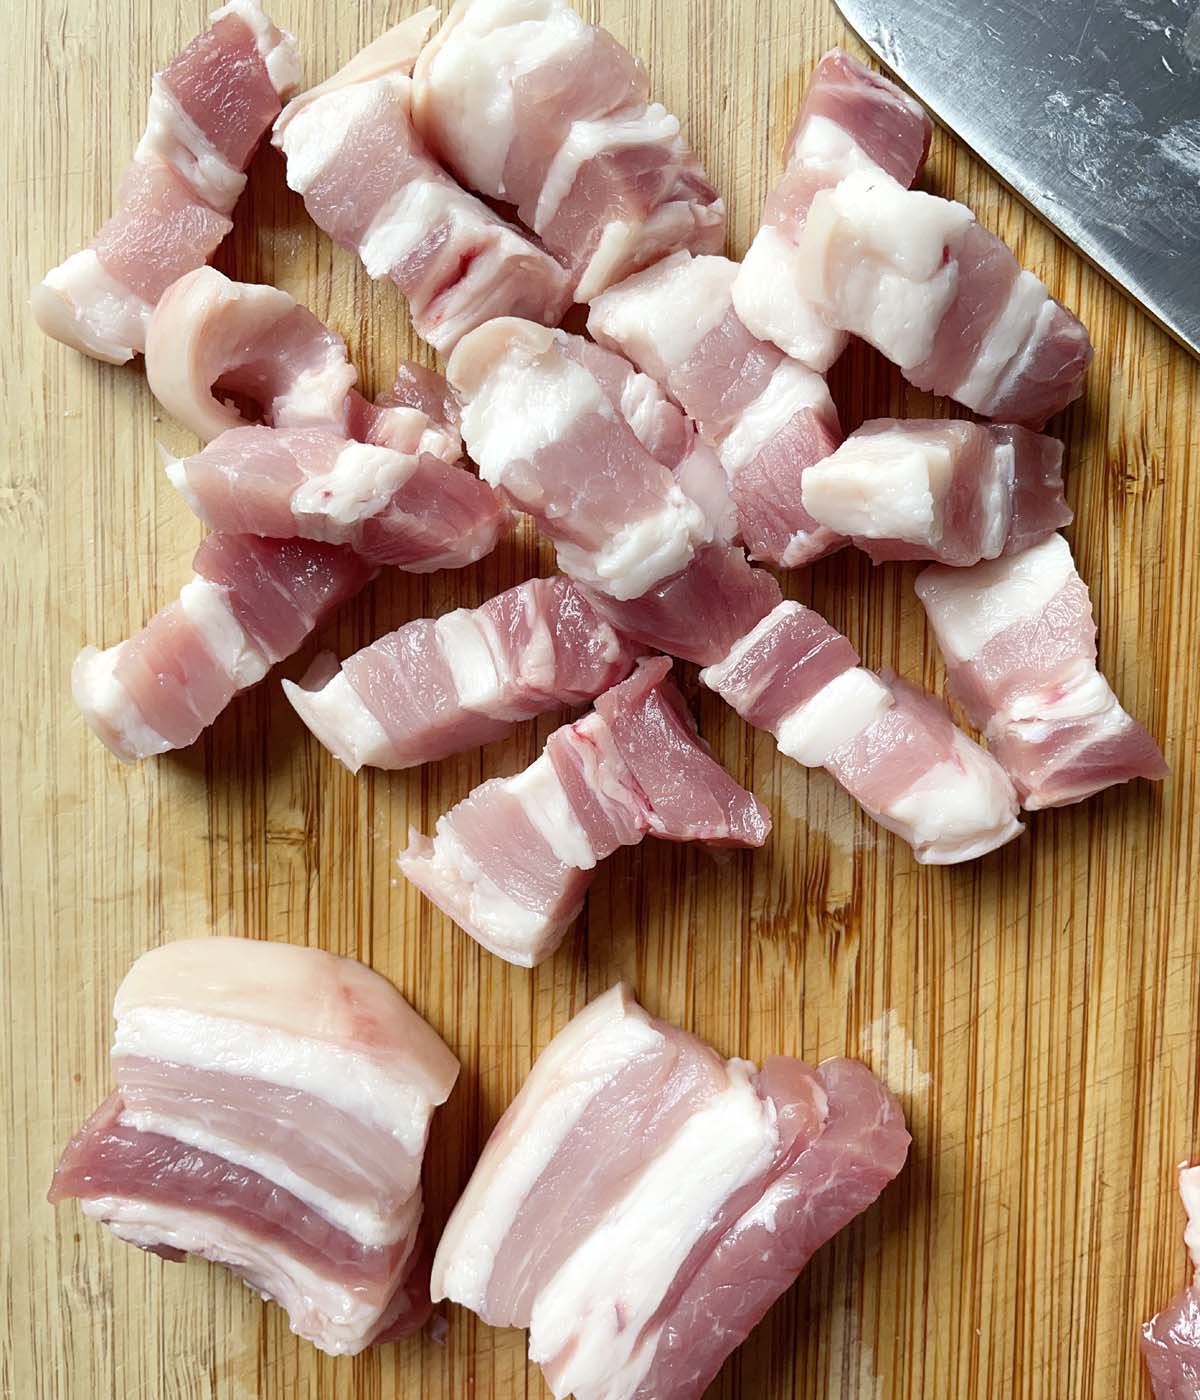 Pork belly that has been cut into small pieces on a wooden cutting board.